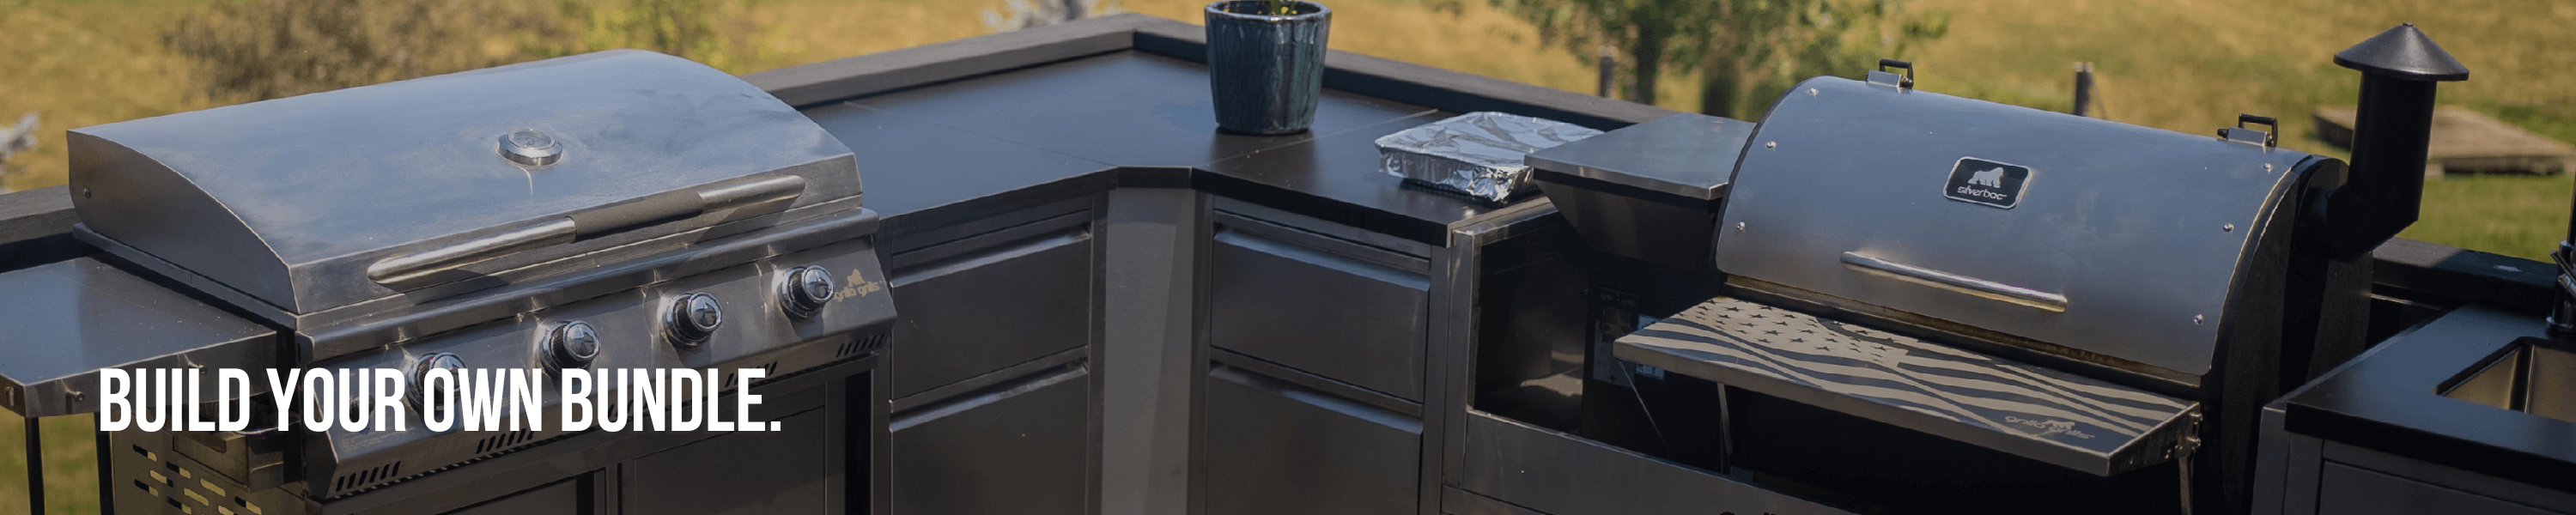 build your own bundle- grilla outdoor kitchen components now on sale!